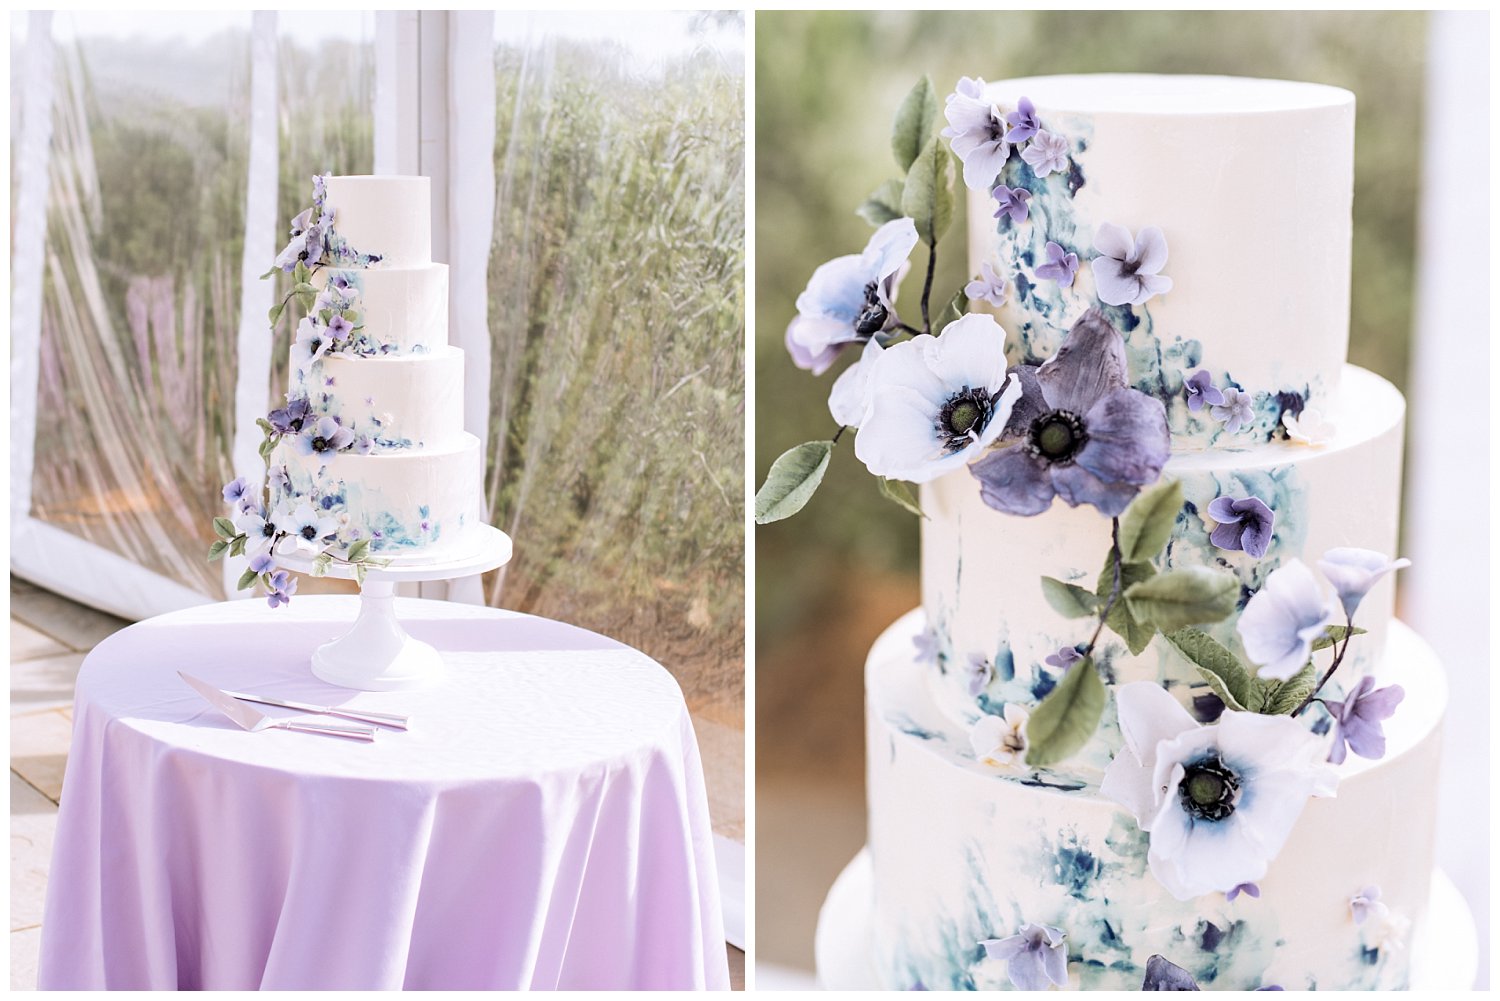 Lavender Wedding Cake at The Market at Grelen photographed by Heather Dodge Photography